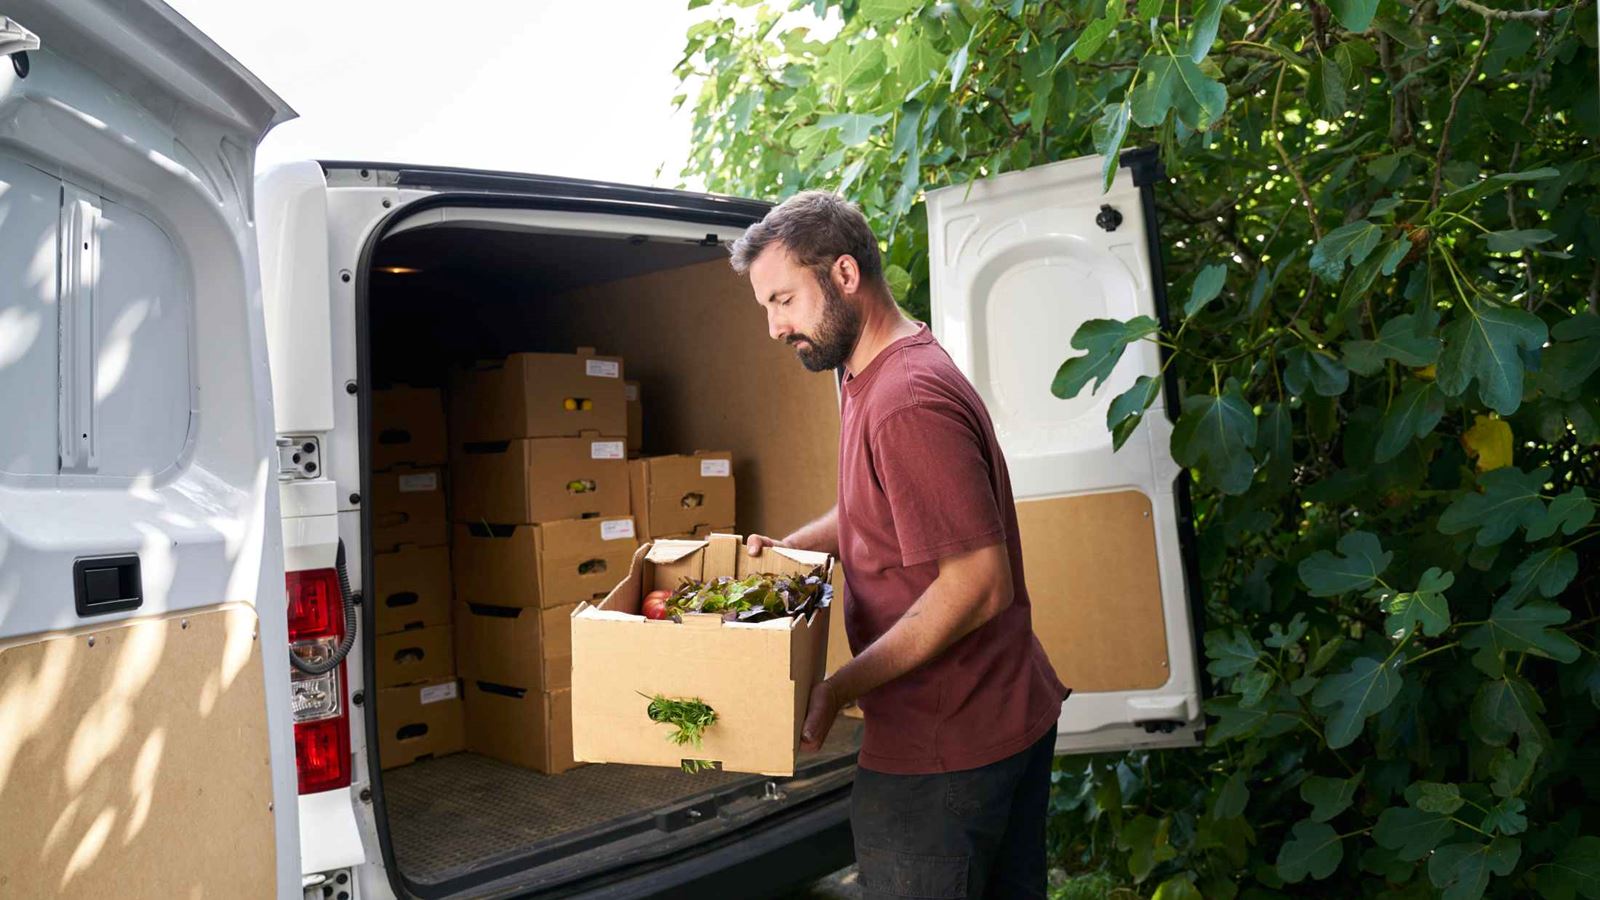 Man loading boxes of goods into the back of a white van